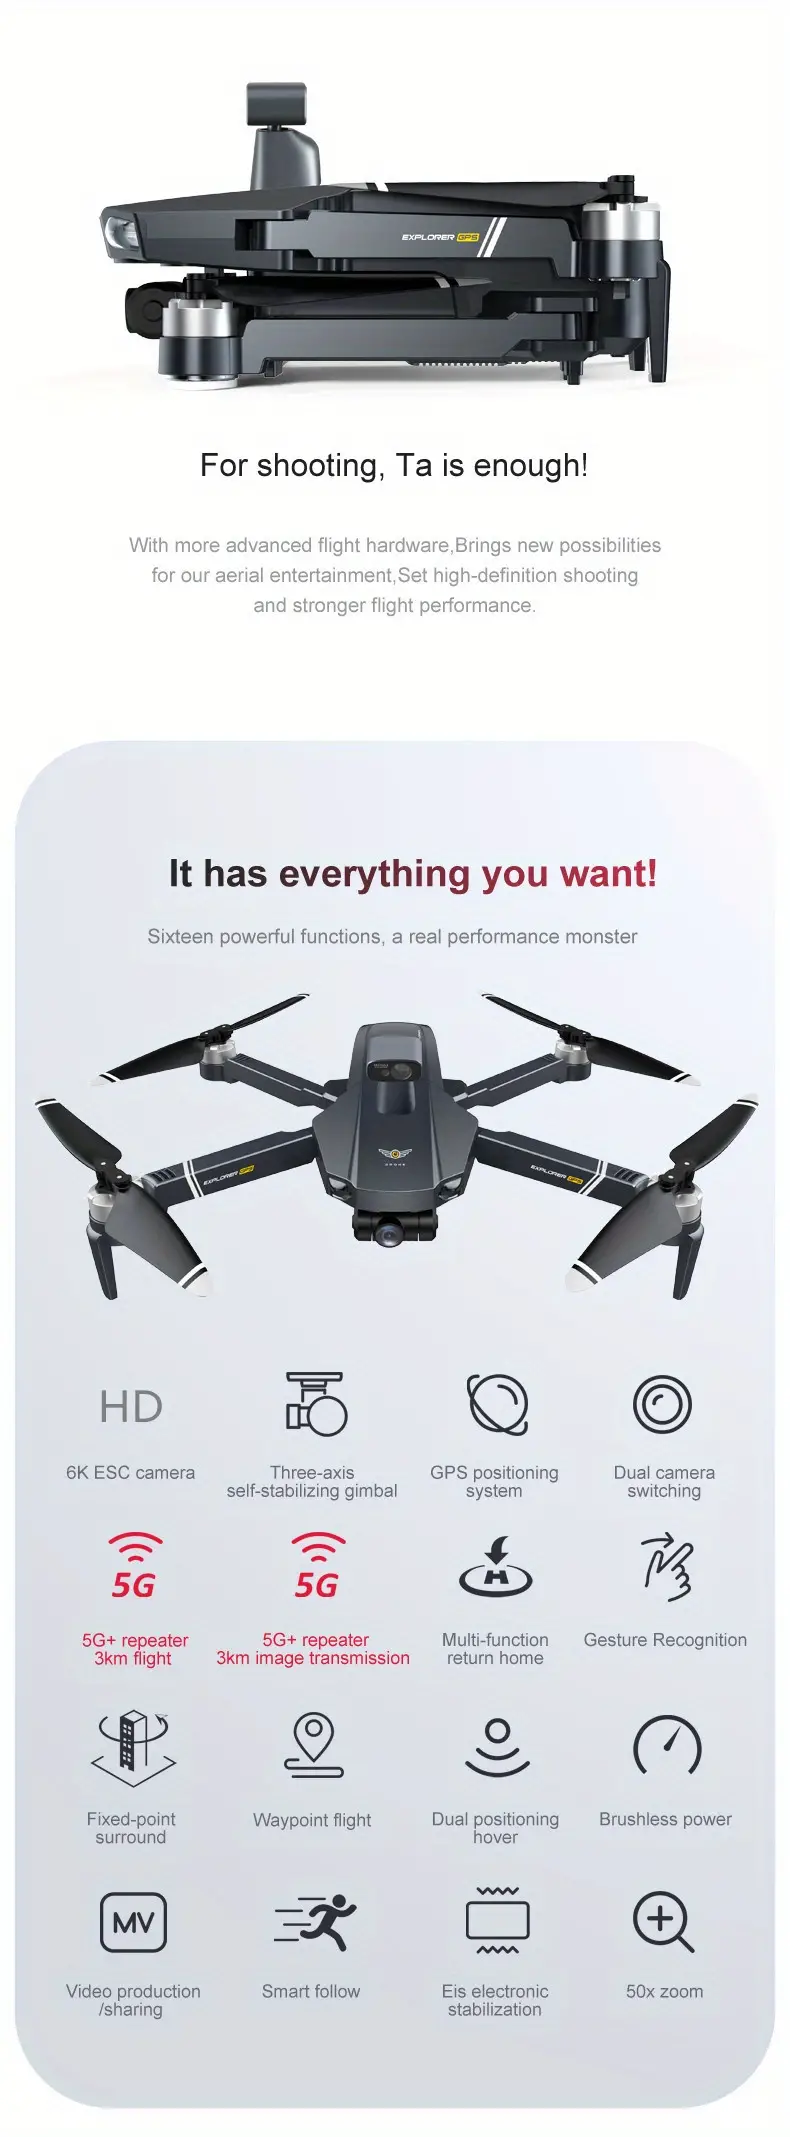 x20 gps brushless drone 360 laser obstacle avoidance 3 axis ptz fpv headless mode intelligent return 3 modes switching main camera transmission frame rate 25 fps adult aerial photography drone details 1